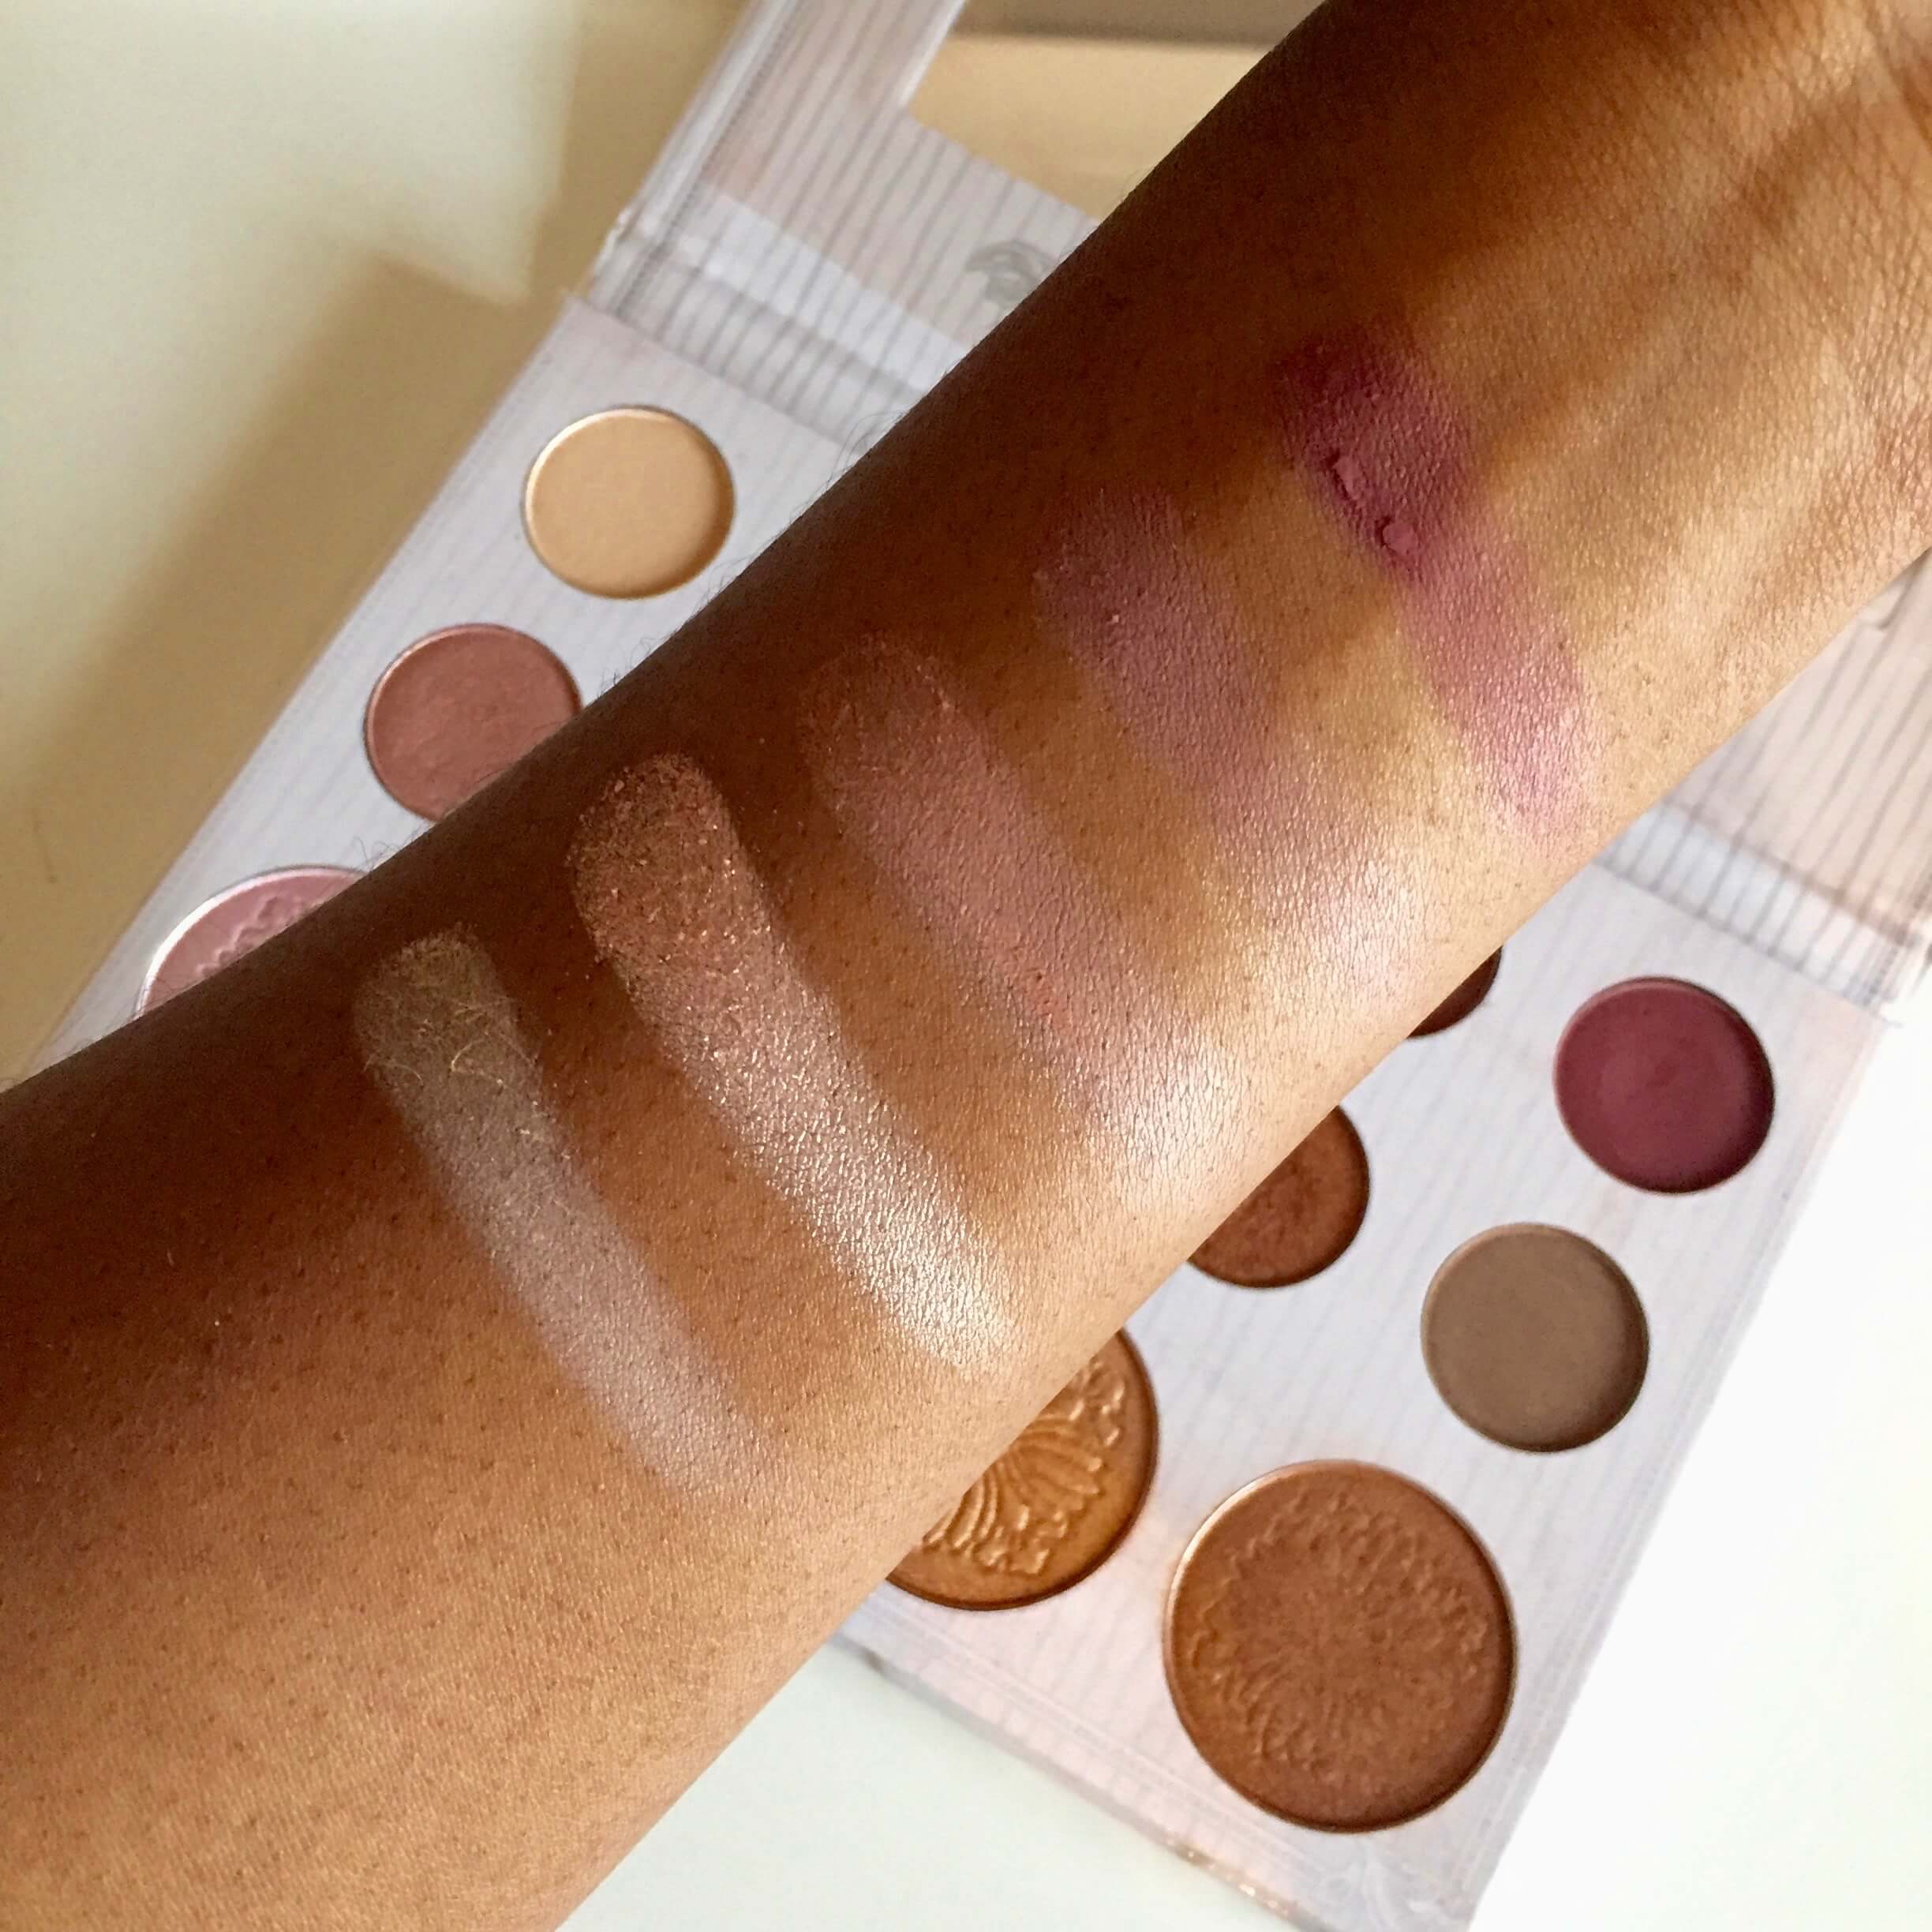 Carli Bybel BH Cosmetics Palette Review and Swatches